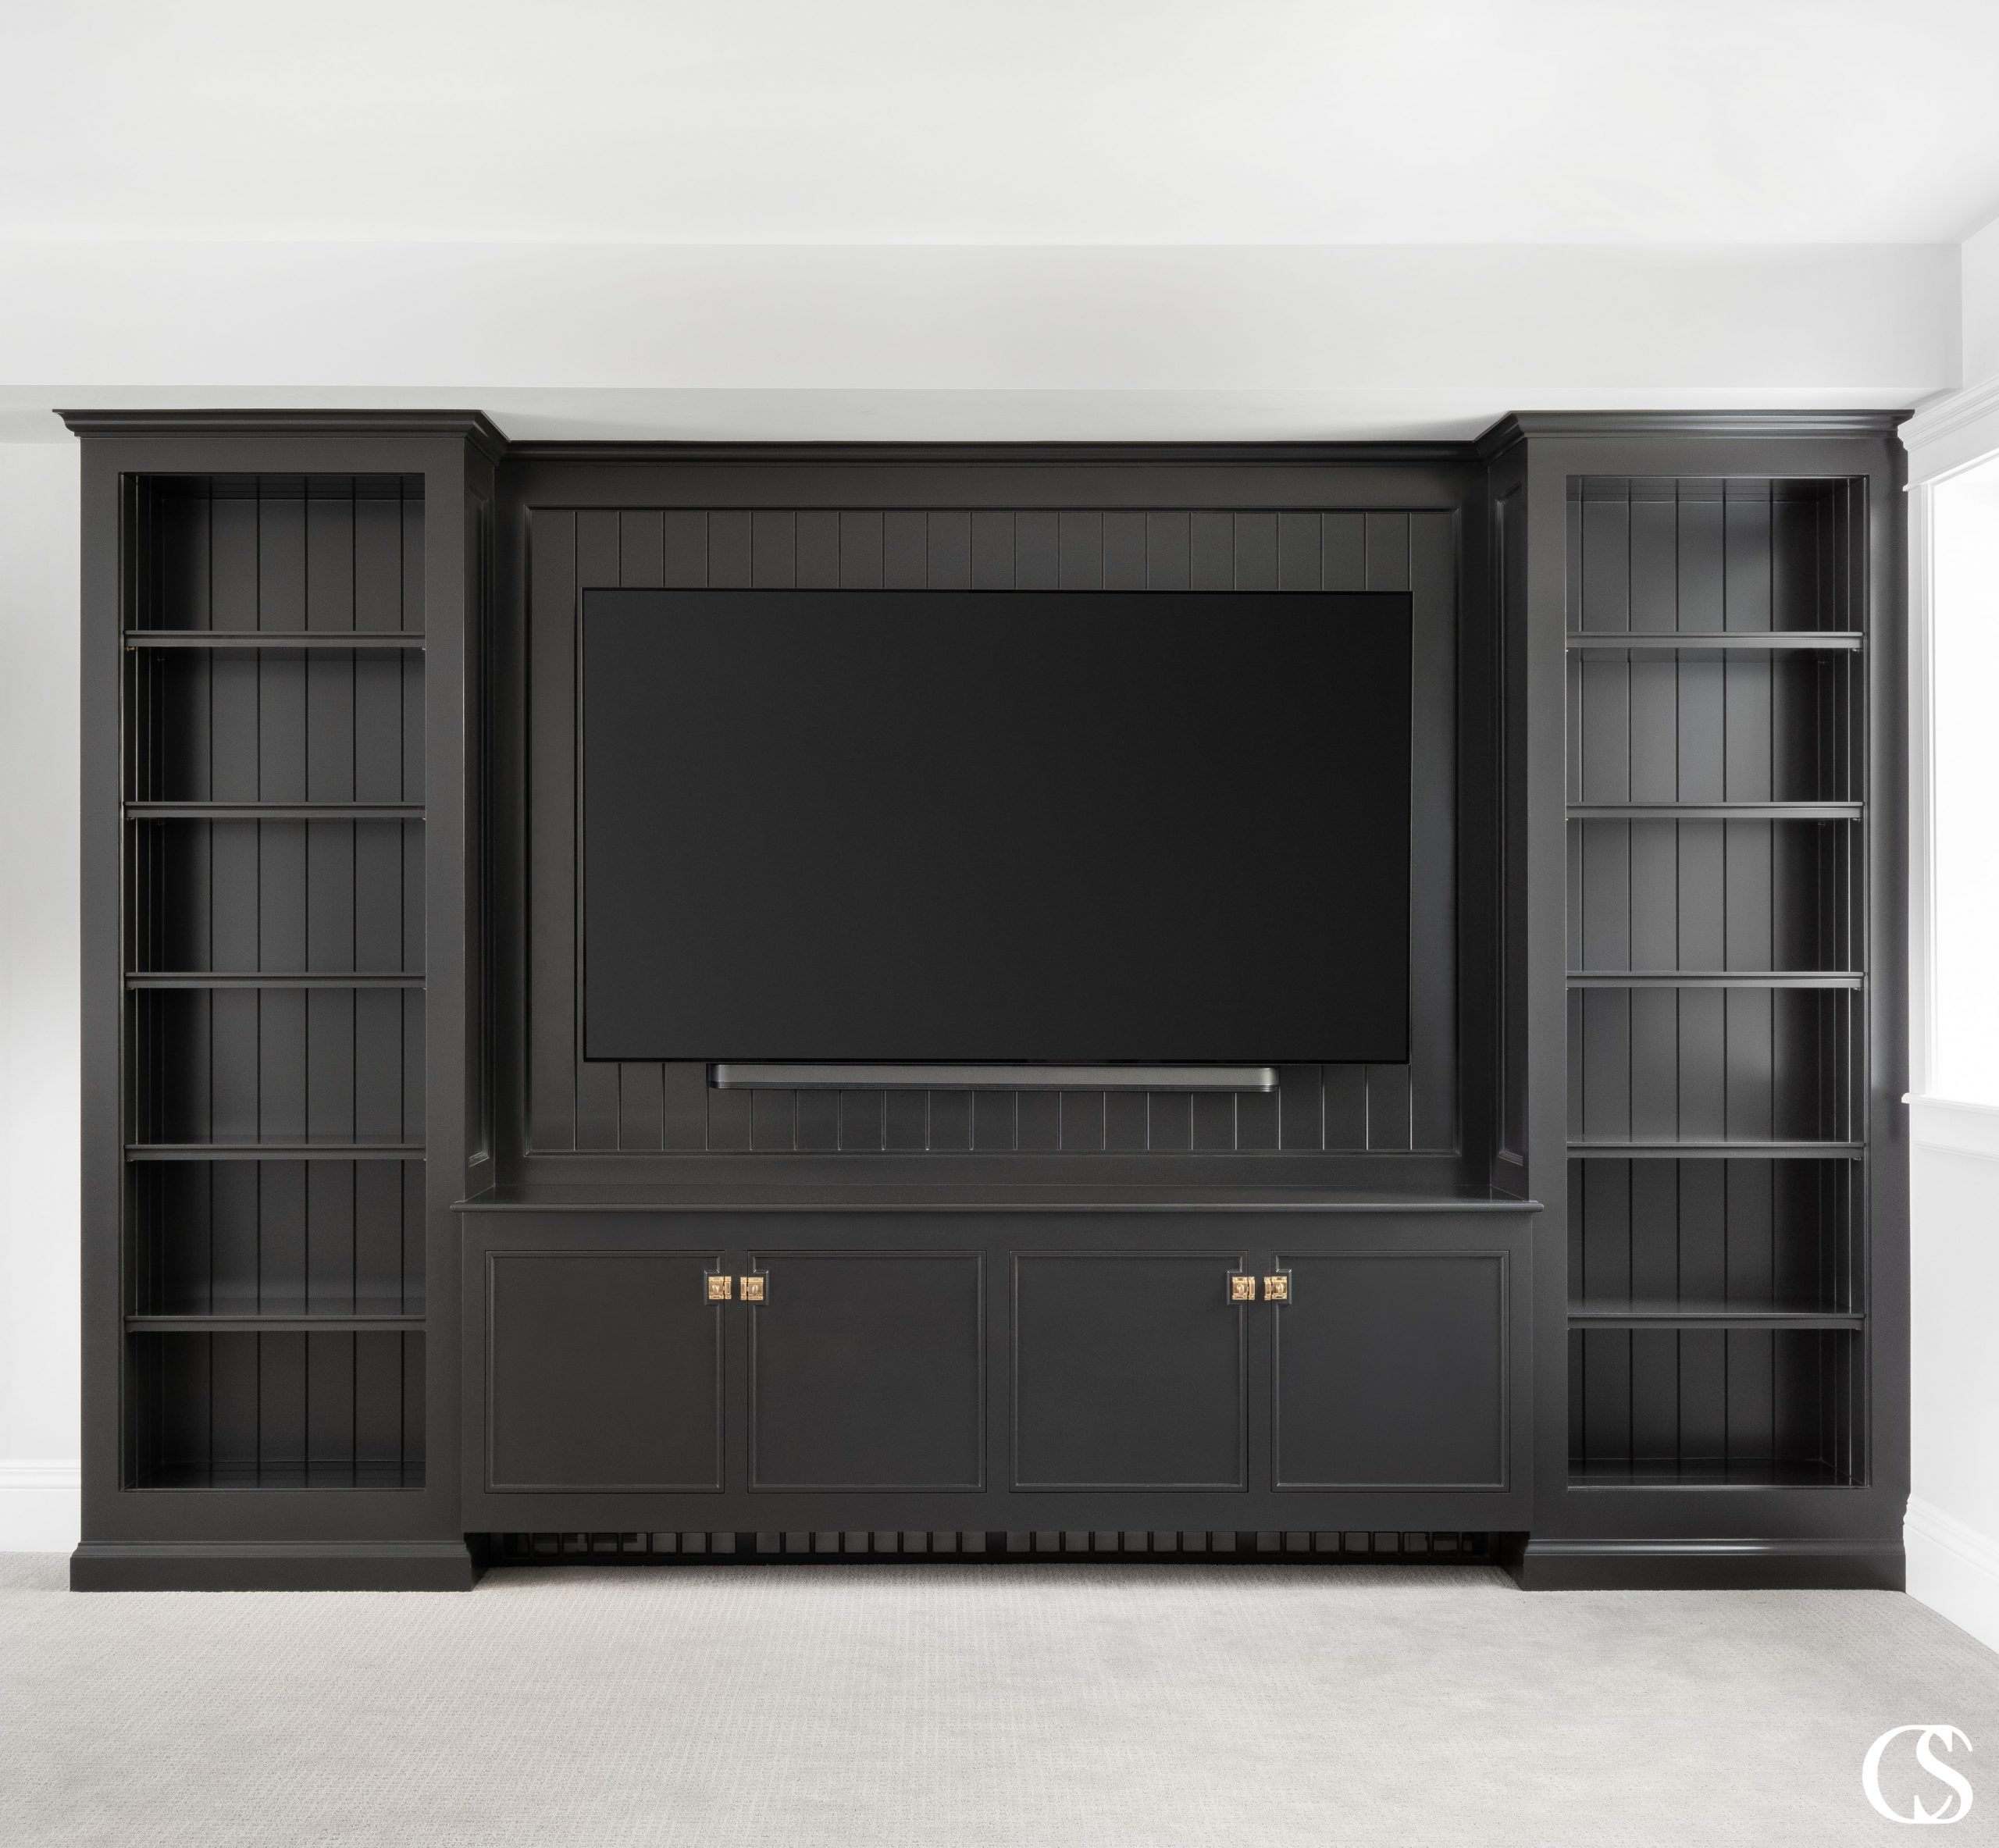 When you begin looking for entertainment center ideas it is important to consider how you and your family will be using the space and what items you’ll need to store. Is this a gathering room that will need to accommodate a variety of activities such as high-tech gaming along with low-tech gaming (board games)? Do you have a large collection of DVDs or collectible vinyl albums to store? Would you like to incorporate lighting into the display areas? These are just a few of the questions for you to consider when creating the best custom entertainment center.